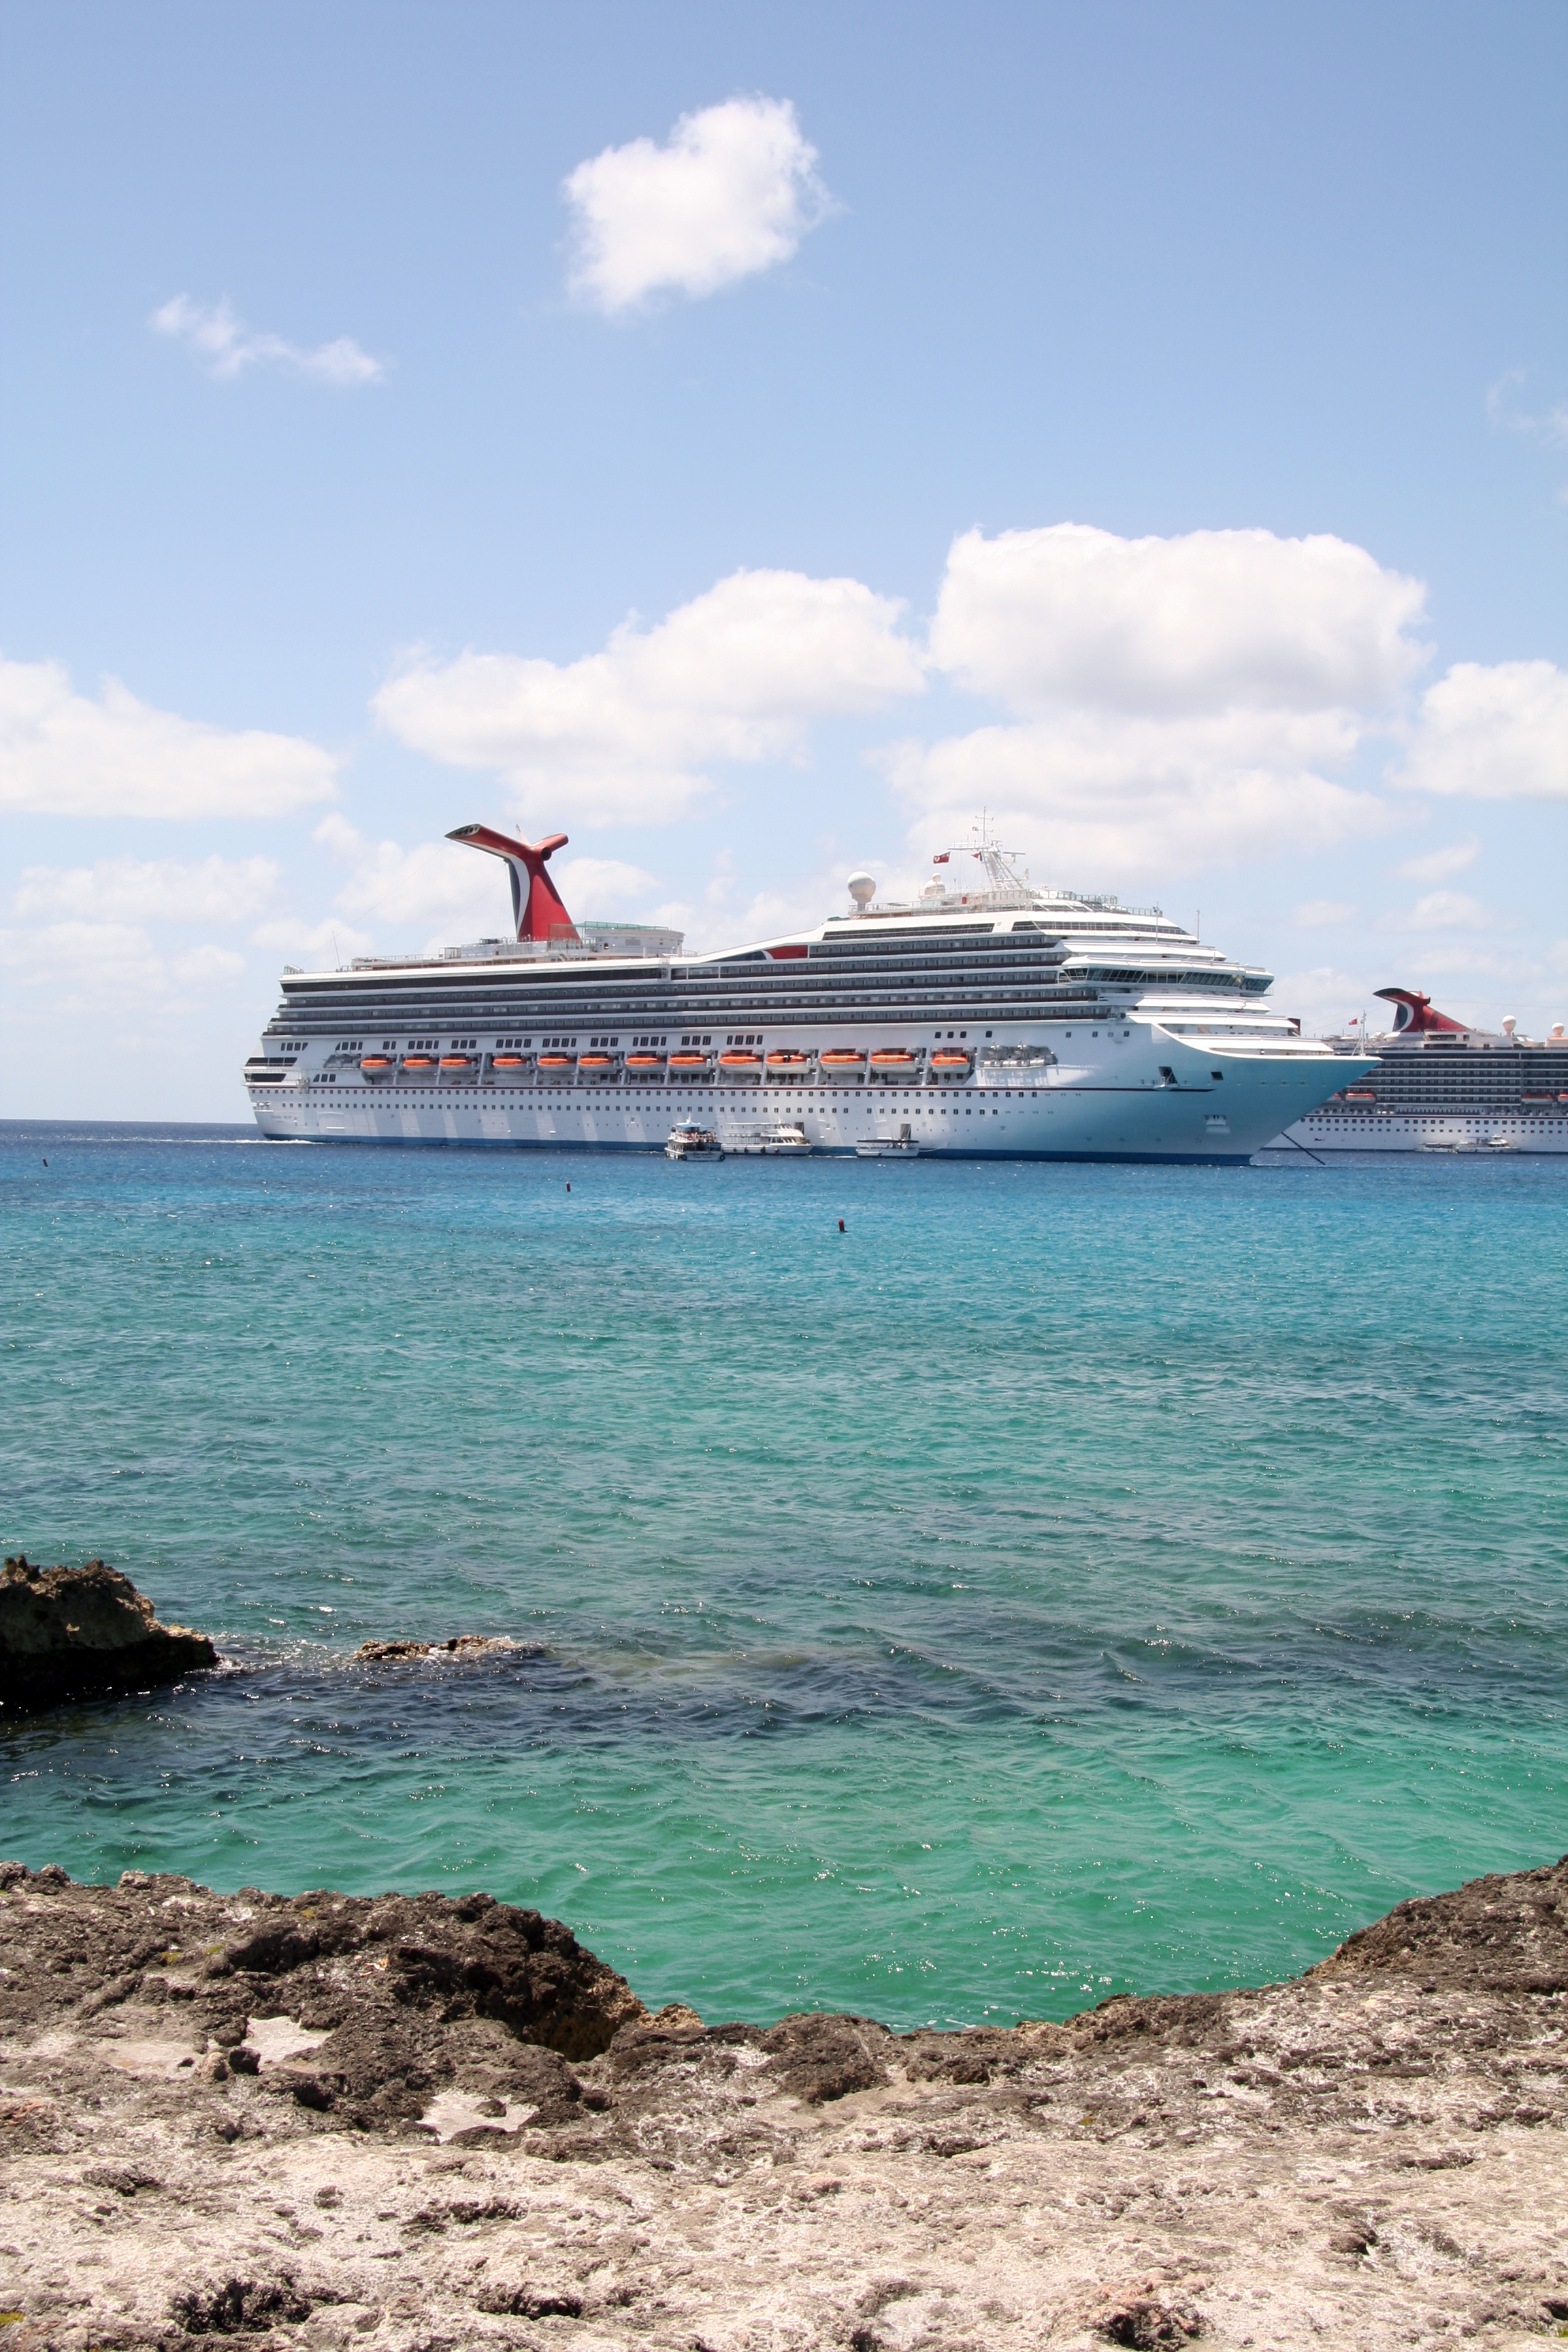 Couple Discovers Hidden Camera While On Carnival Cruise